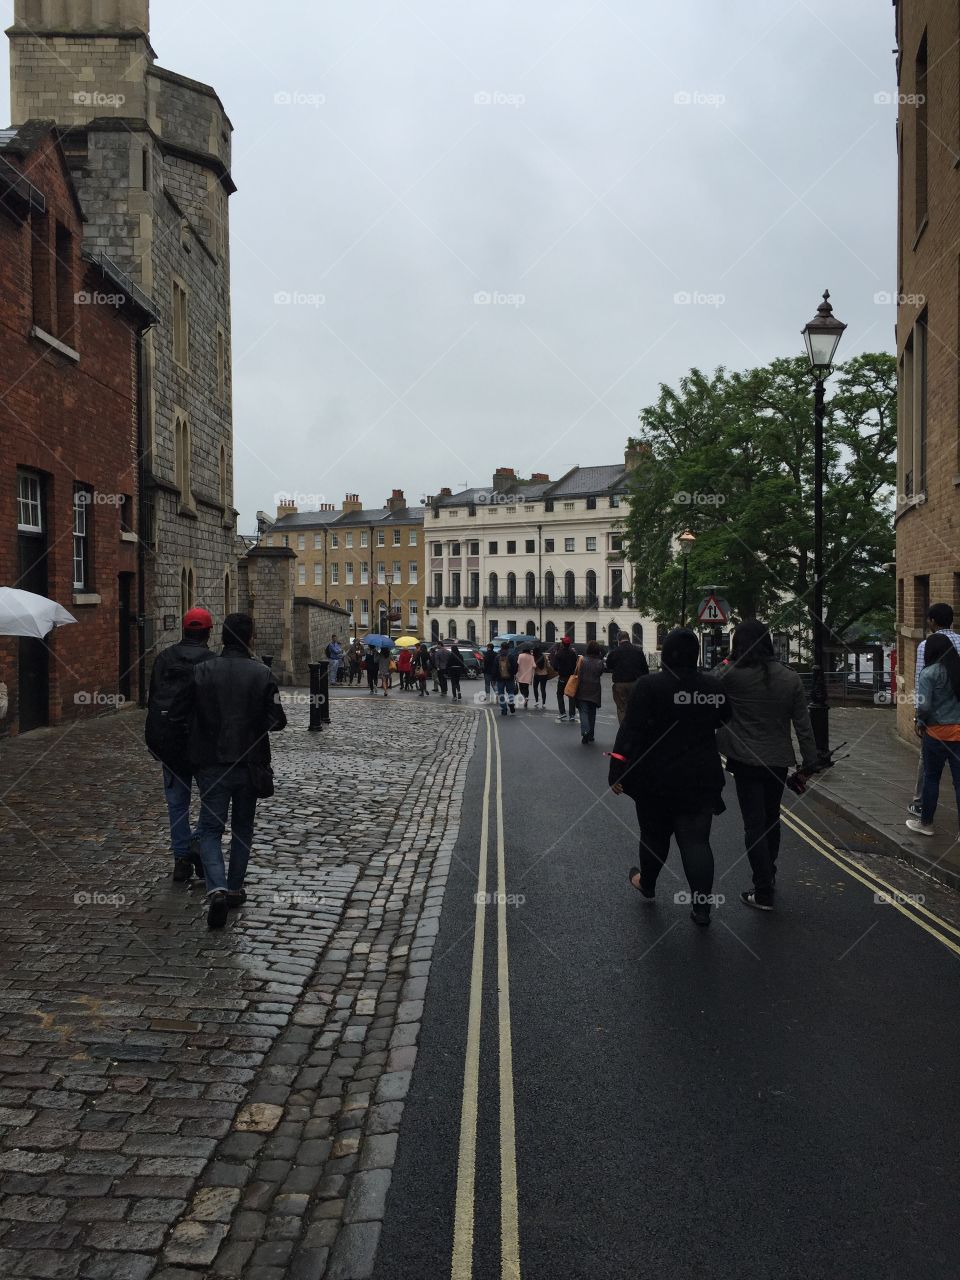 rainy, comfortable, cozy street in Windsor, England. Cloudy and gloomy with only a few spots of color, gorgeous cobblestone as well as pavement, historical buildings.